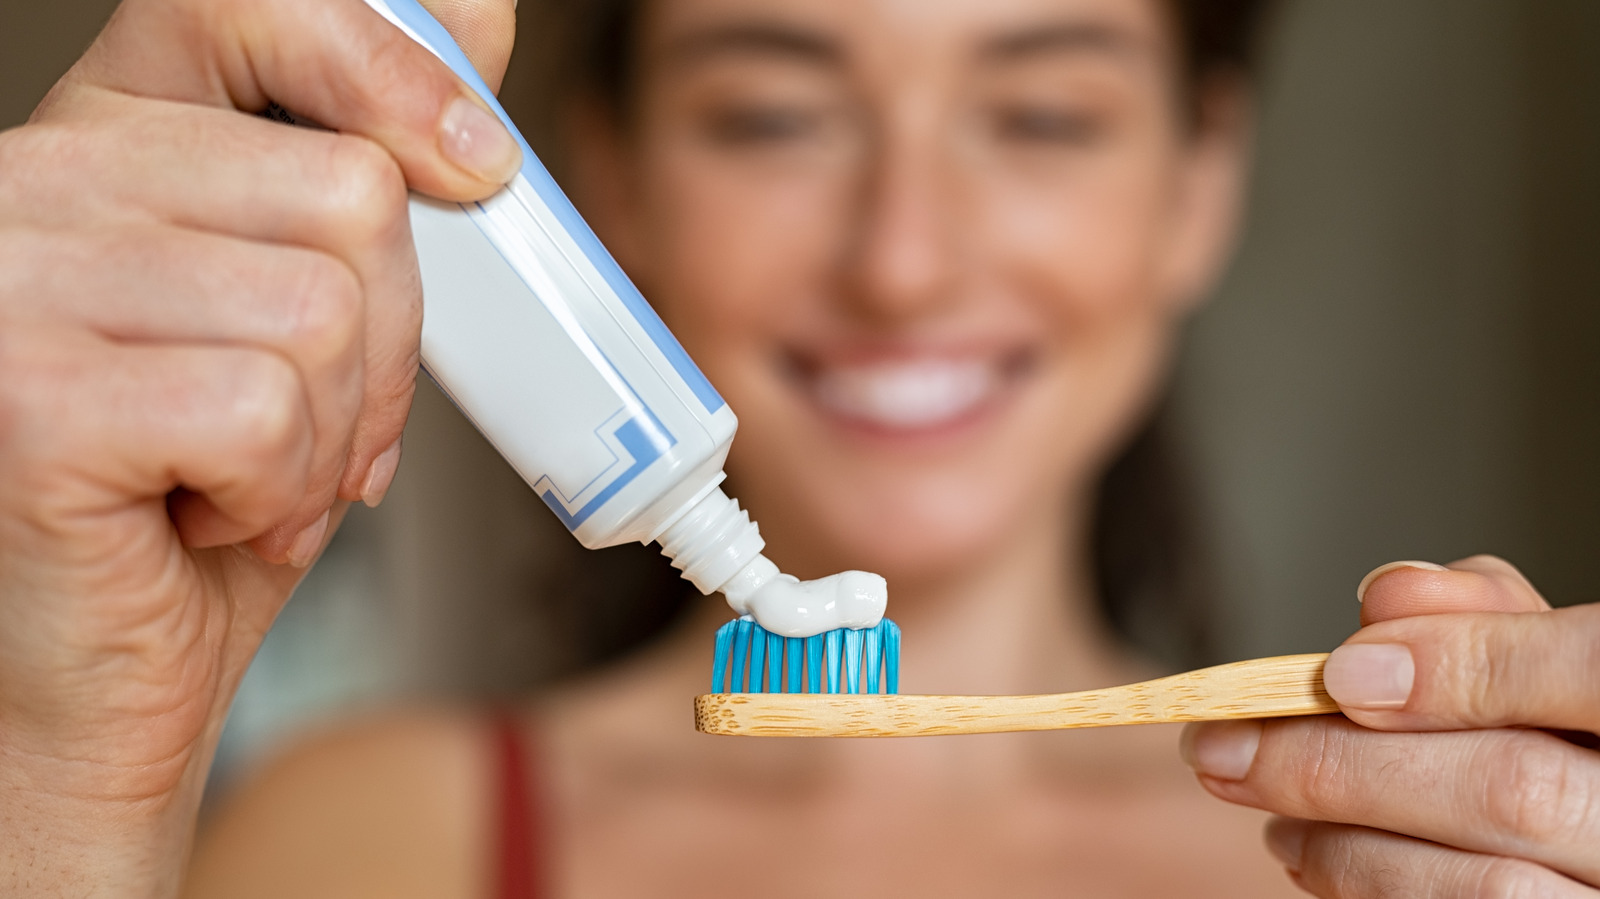 What Is The Best Whitening Toothpaste If You're On A Budget?